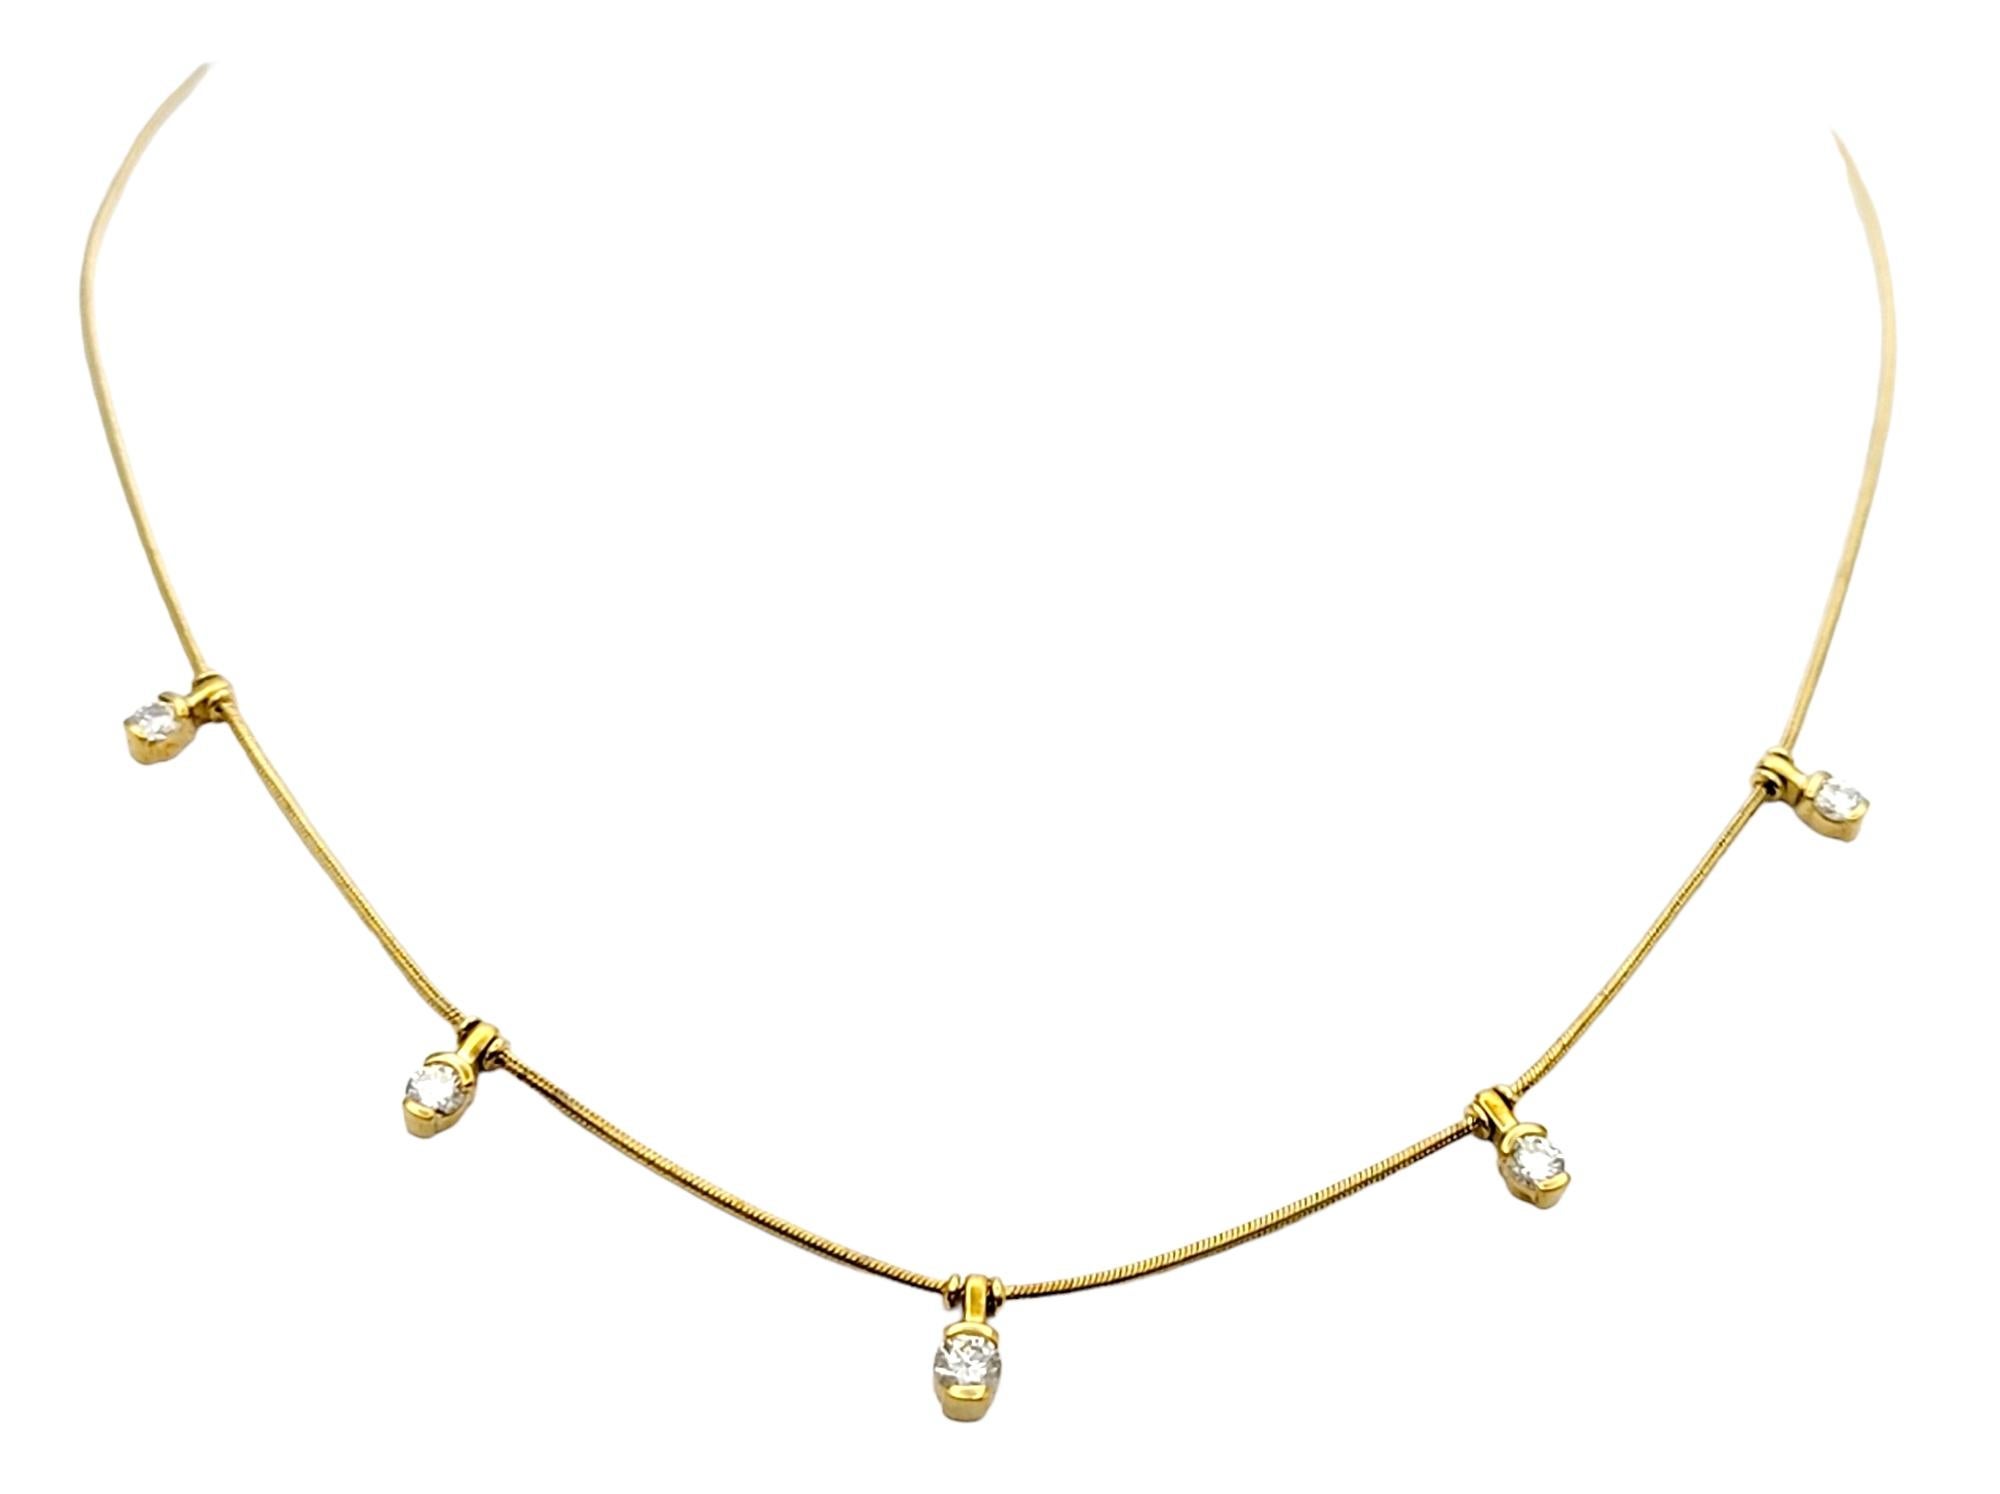 Gorgeous diamond station necklace by esteemed jewelry designer, Jose Hess. The Jose Hess brand is focused on creating sophisticated simplicity with delicate, feminine pieces can be paired with red carpet gowns as easily as with jeans and a t-shirt,